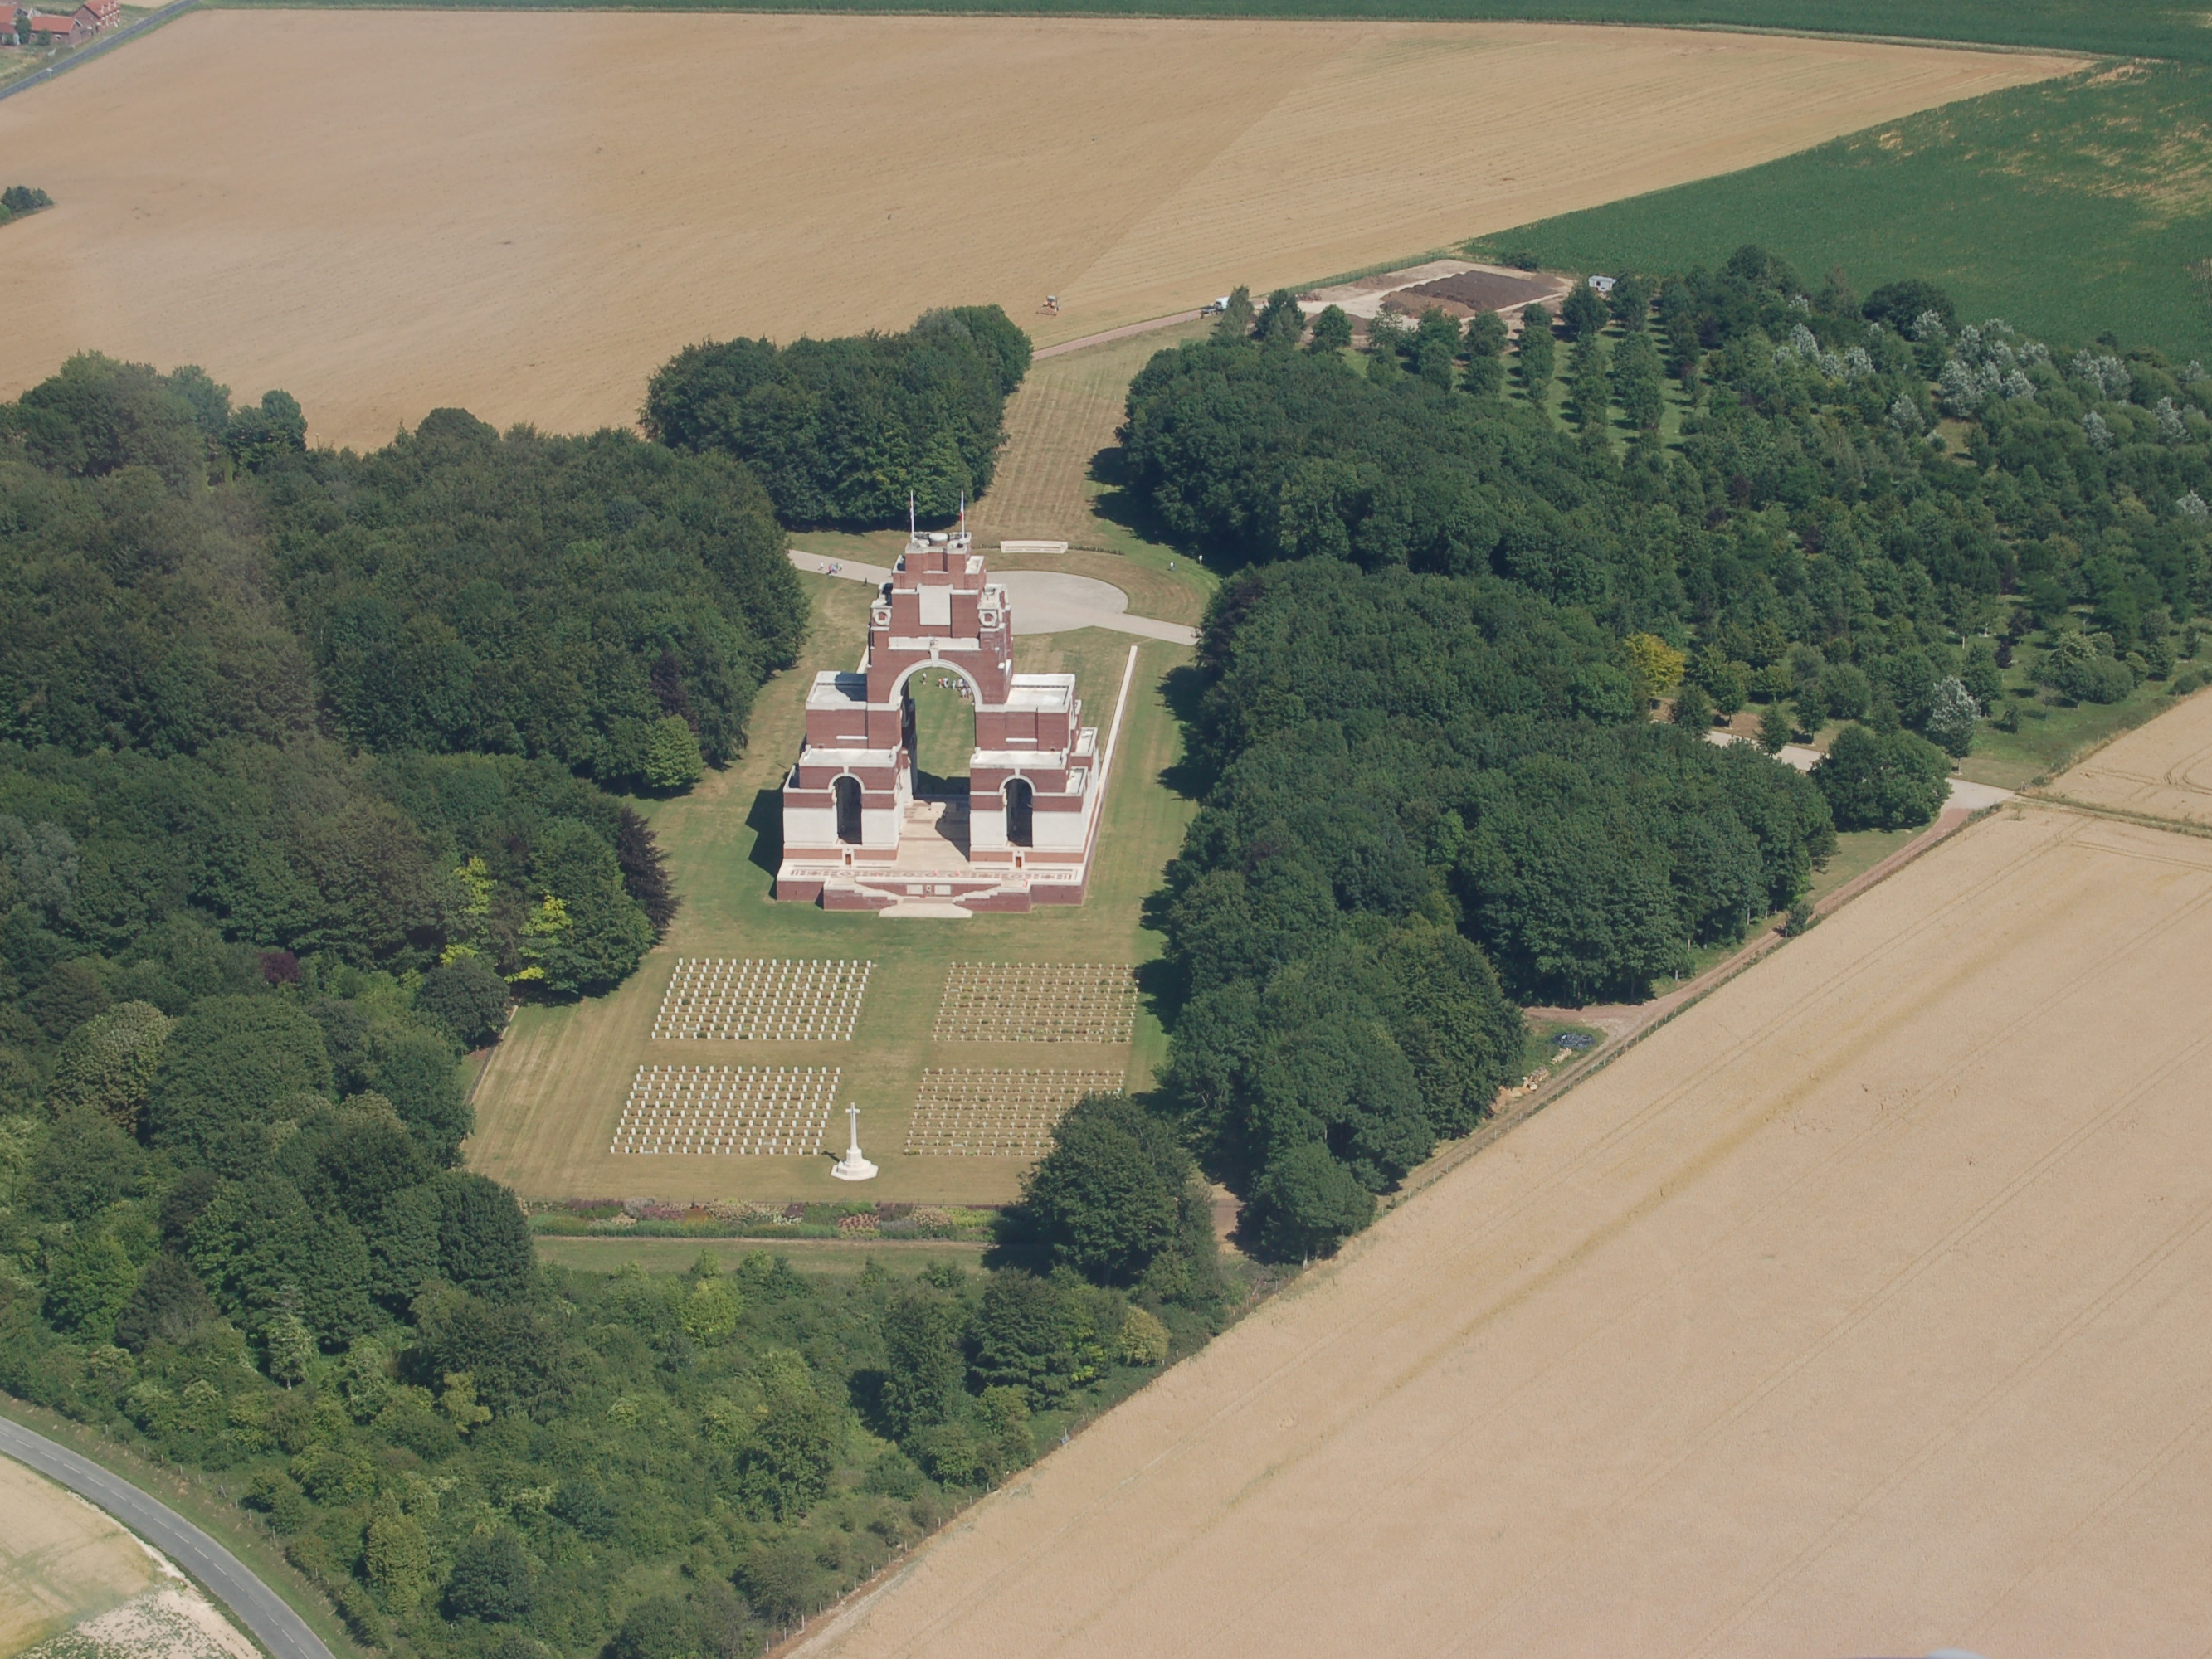 Thiepval, Somme